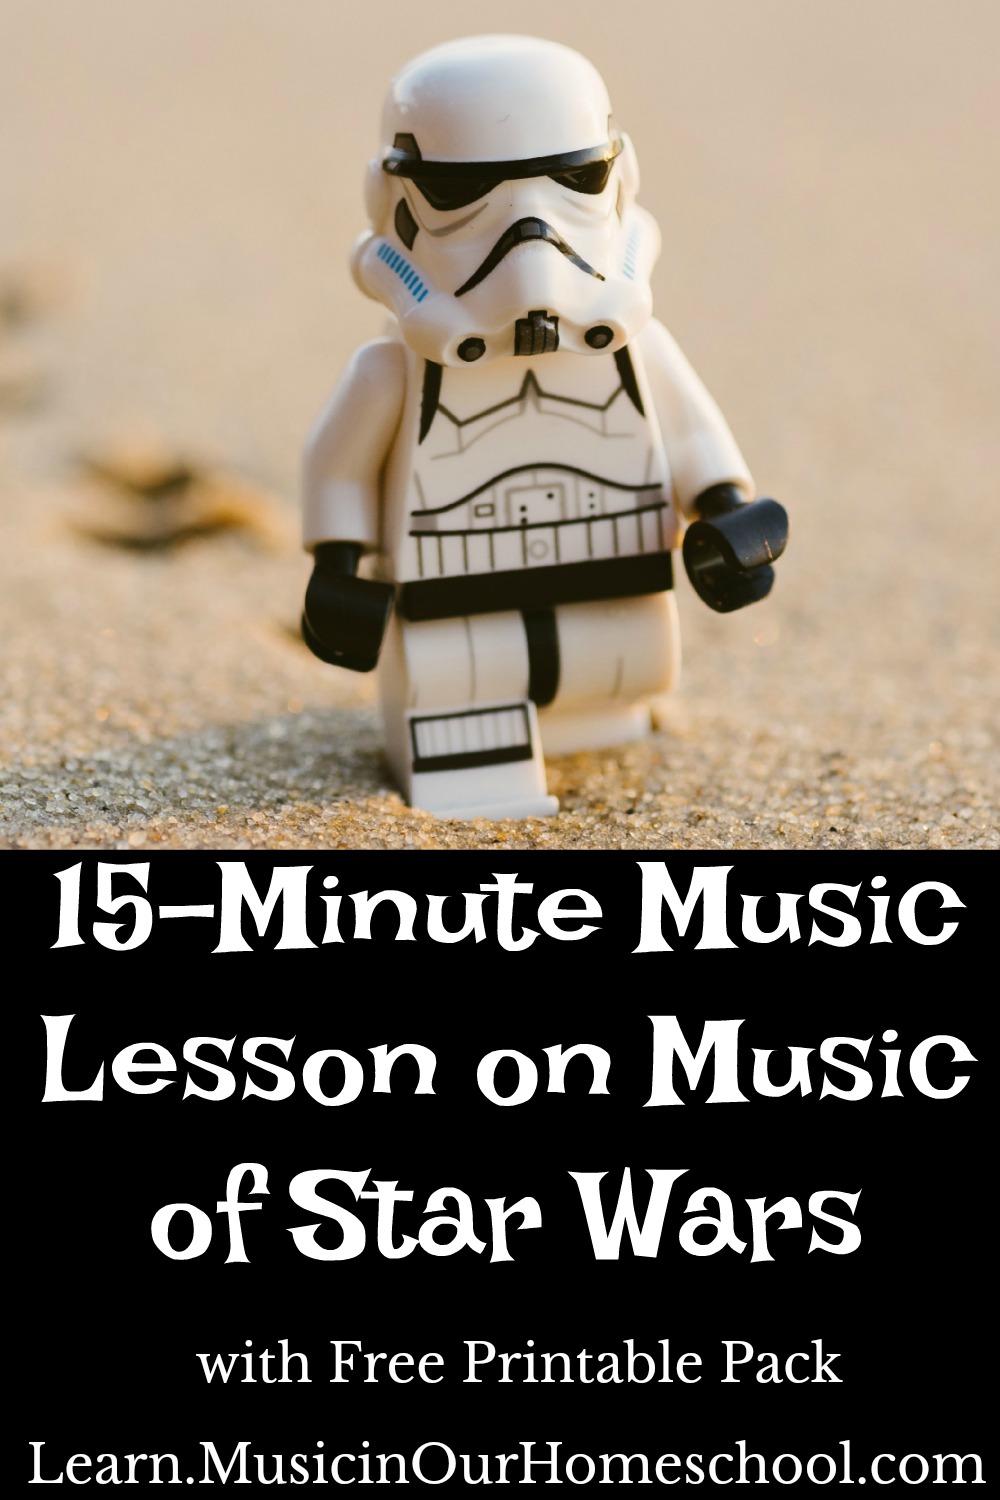 15-Minute Music Lesson on Music of Star Wars. Learn about John Williams and his themes/leitmotifs.